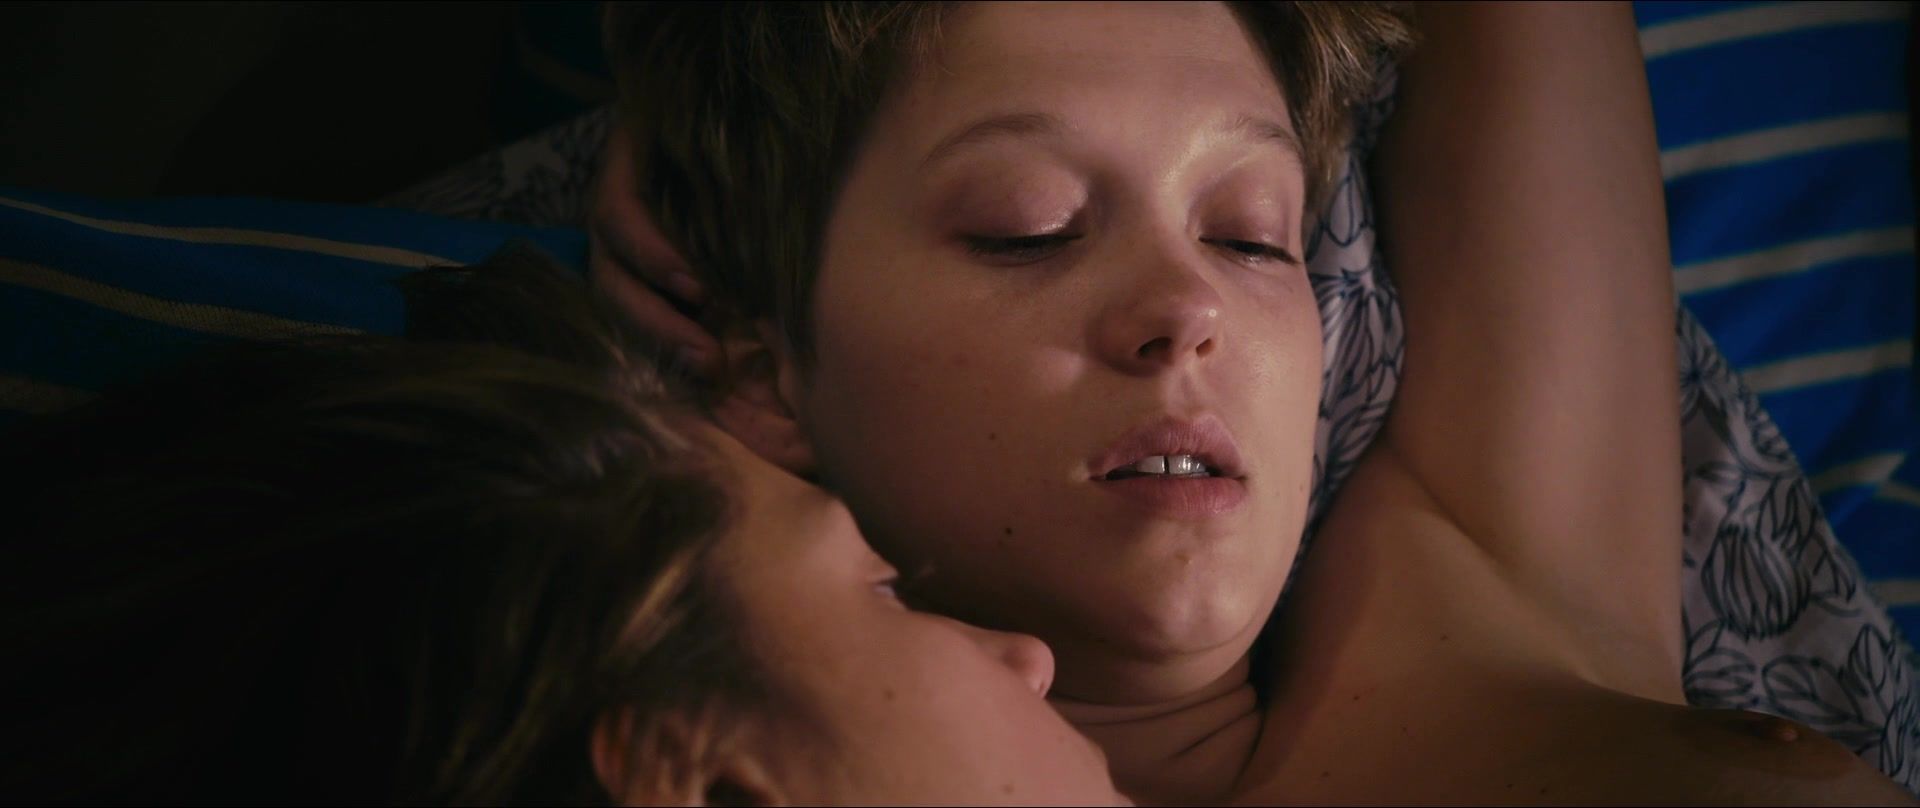 Youth Porn Best lesbian scene in movies | Adele Exarchopoulos nude & Léa Seydoux naked | The film "Blue Is The Warmest Color" (2013) Oldyoung